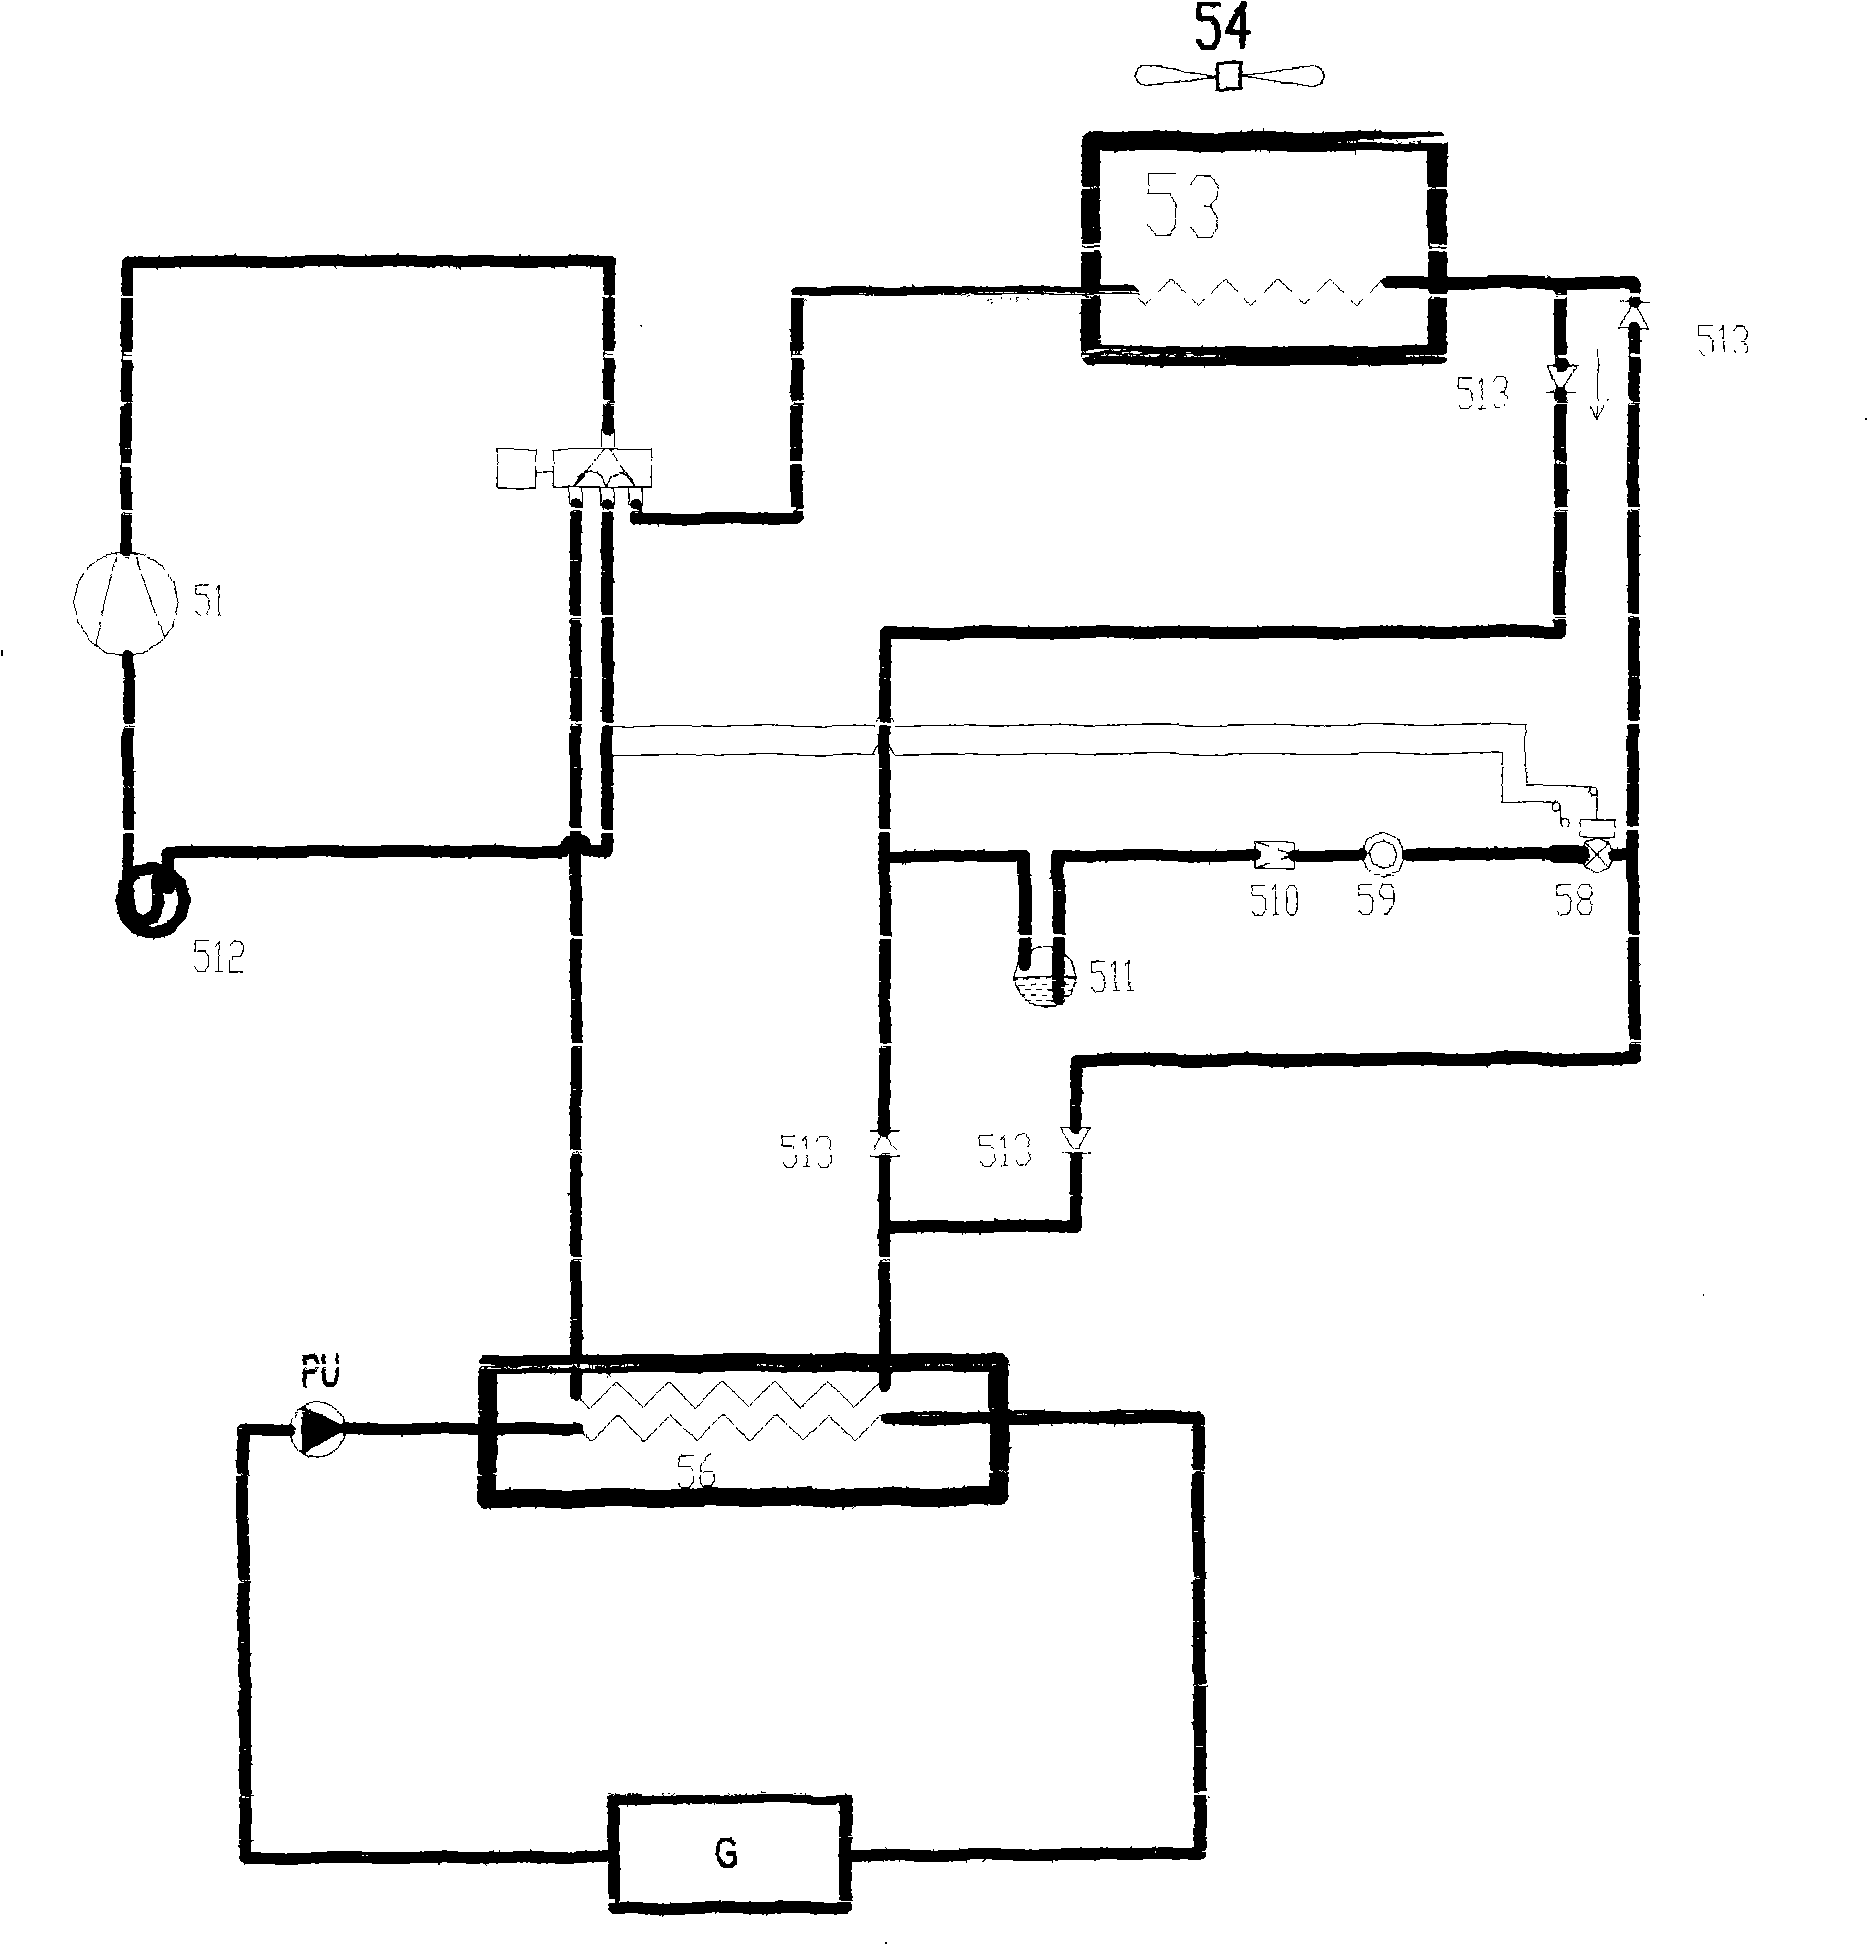 Double-cold source heat pump centralized type air conditioner device